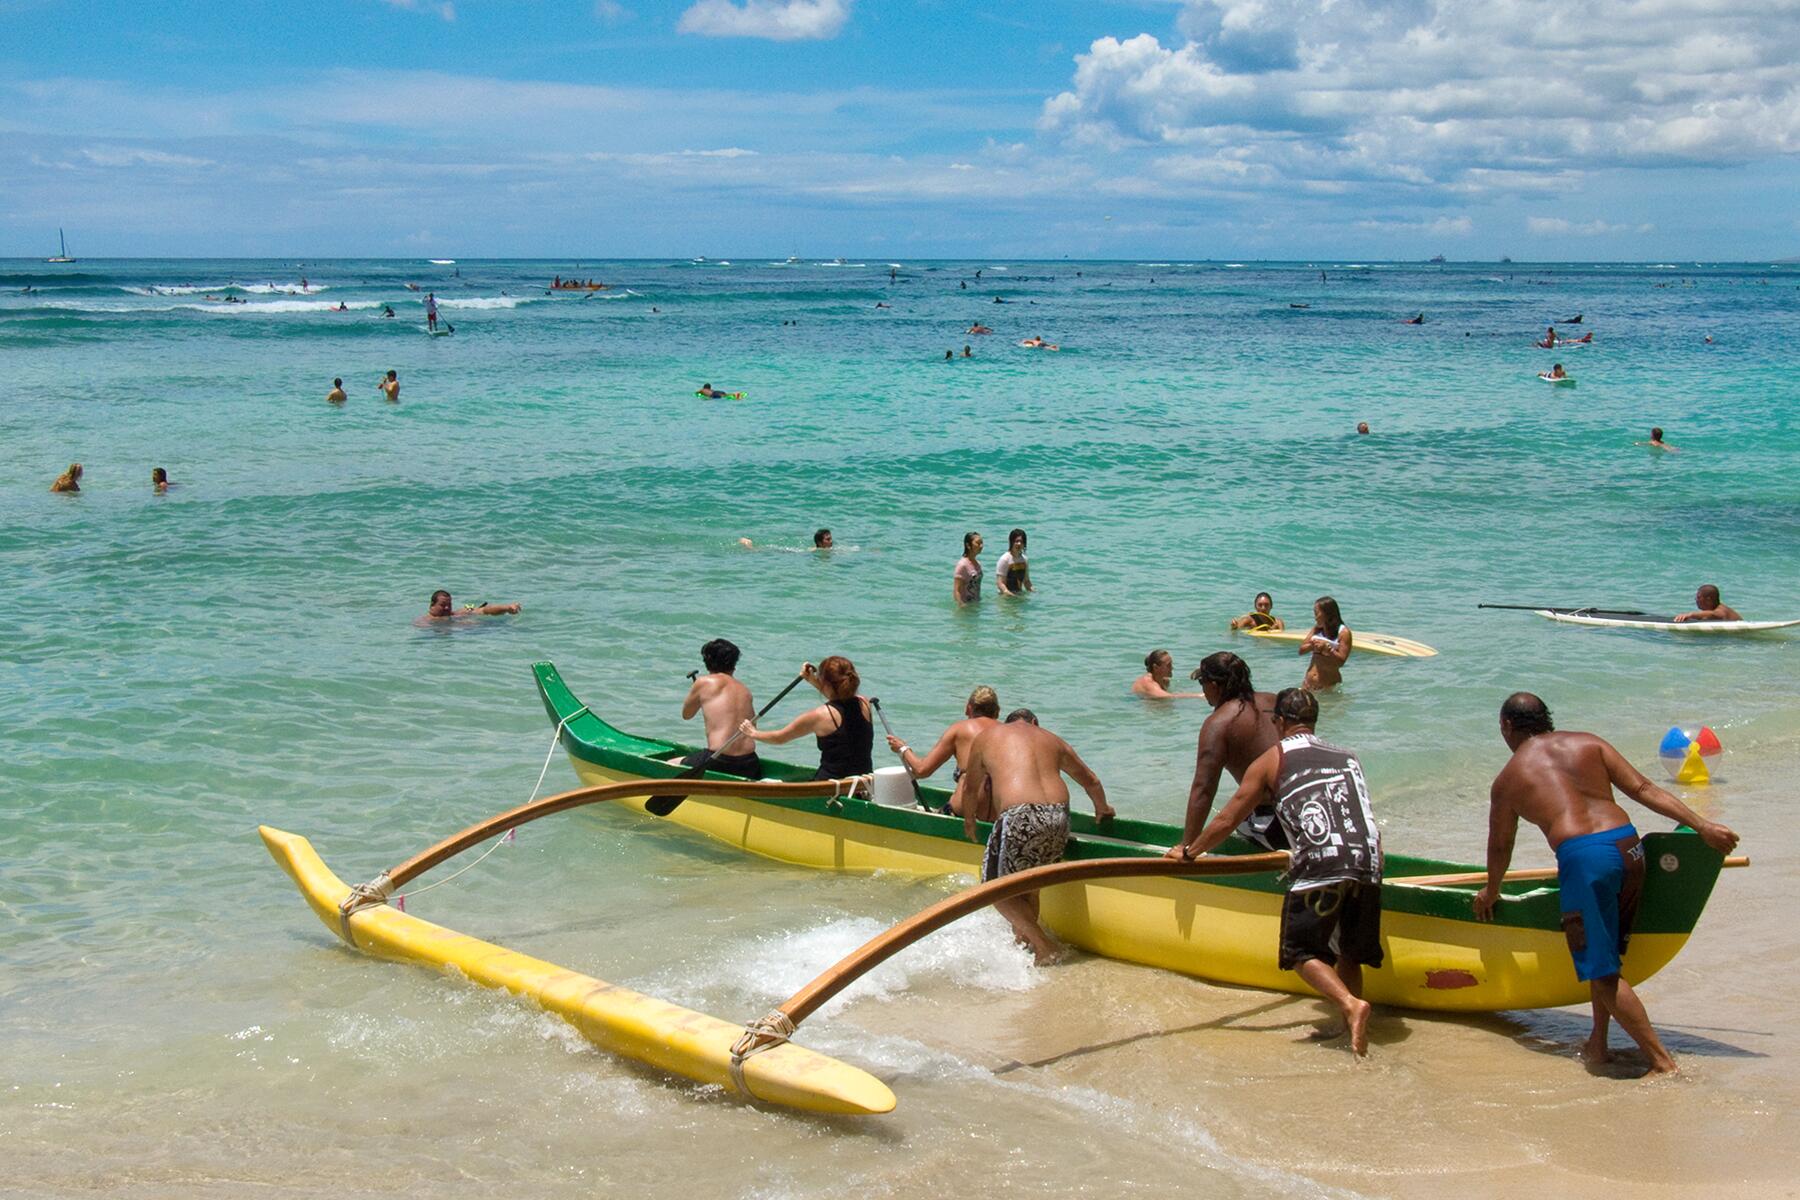 <a href='https://www.fodors.com/world/north-america/usa/hawaii/oahu/experiences/news/photos/25-ultimate-things-to-do-on-oahu#'>From &quot;35 Ultimate Things to Do in Oahu, Hawaii: Pull Your Weight in an Outrigger Practice &quot;</a>